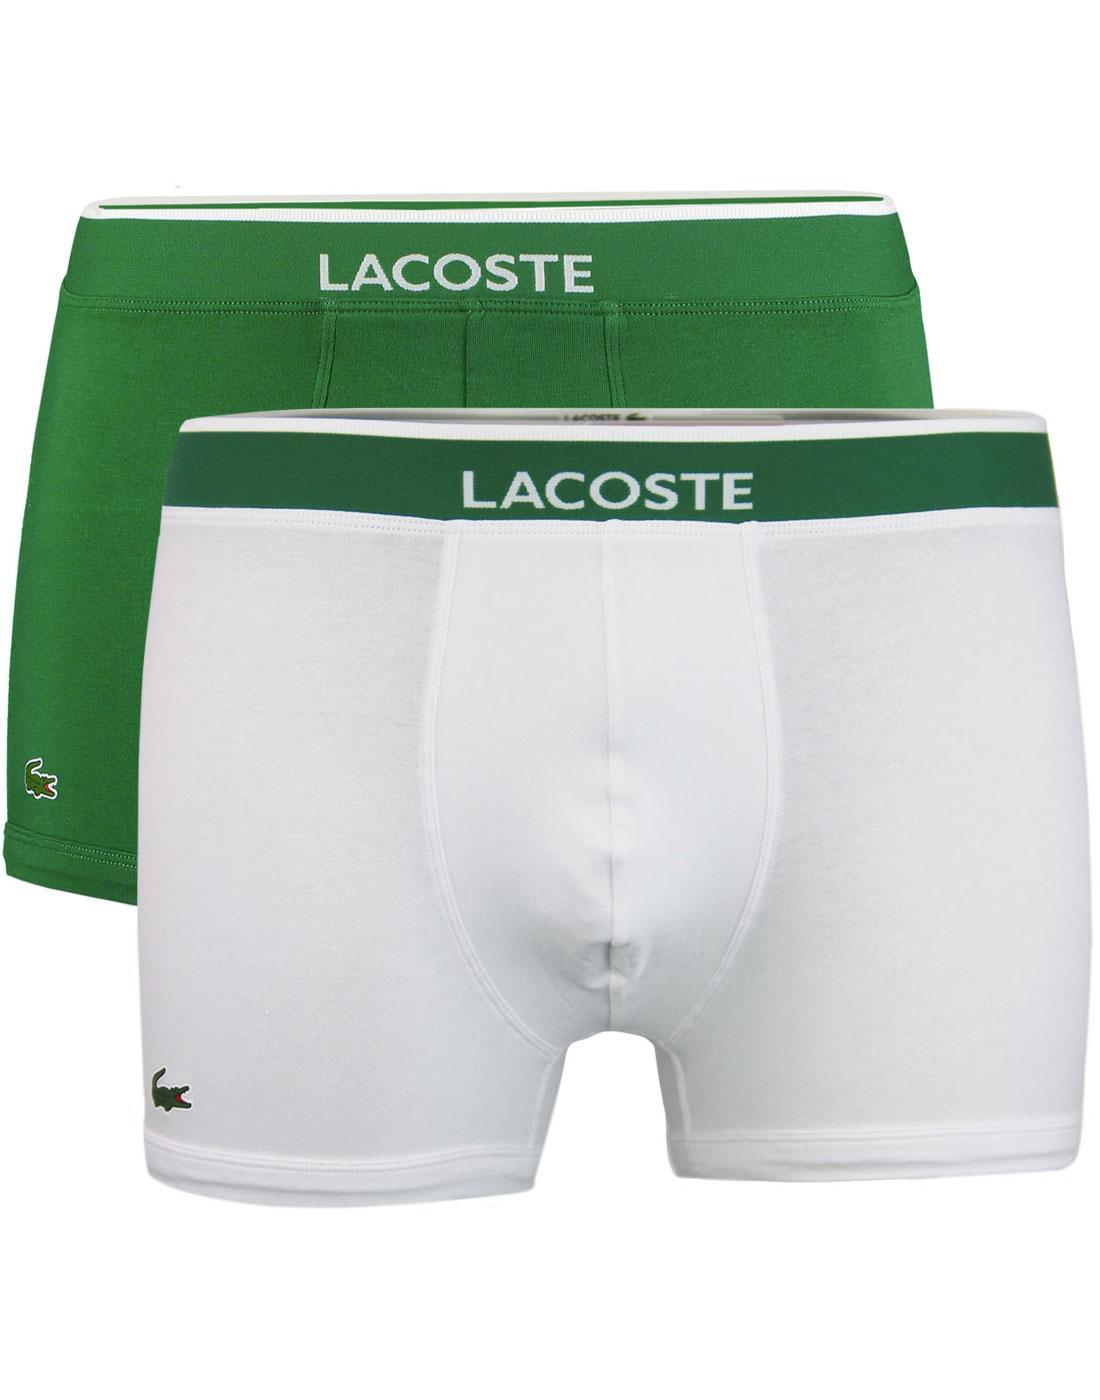 + LACOSTE Men's 2 Pack Cotton Stretch Trunks W/G